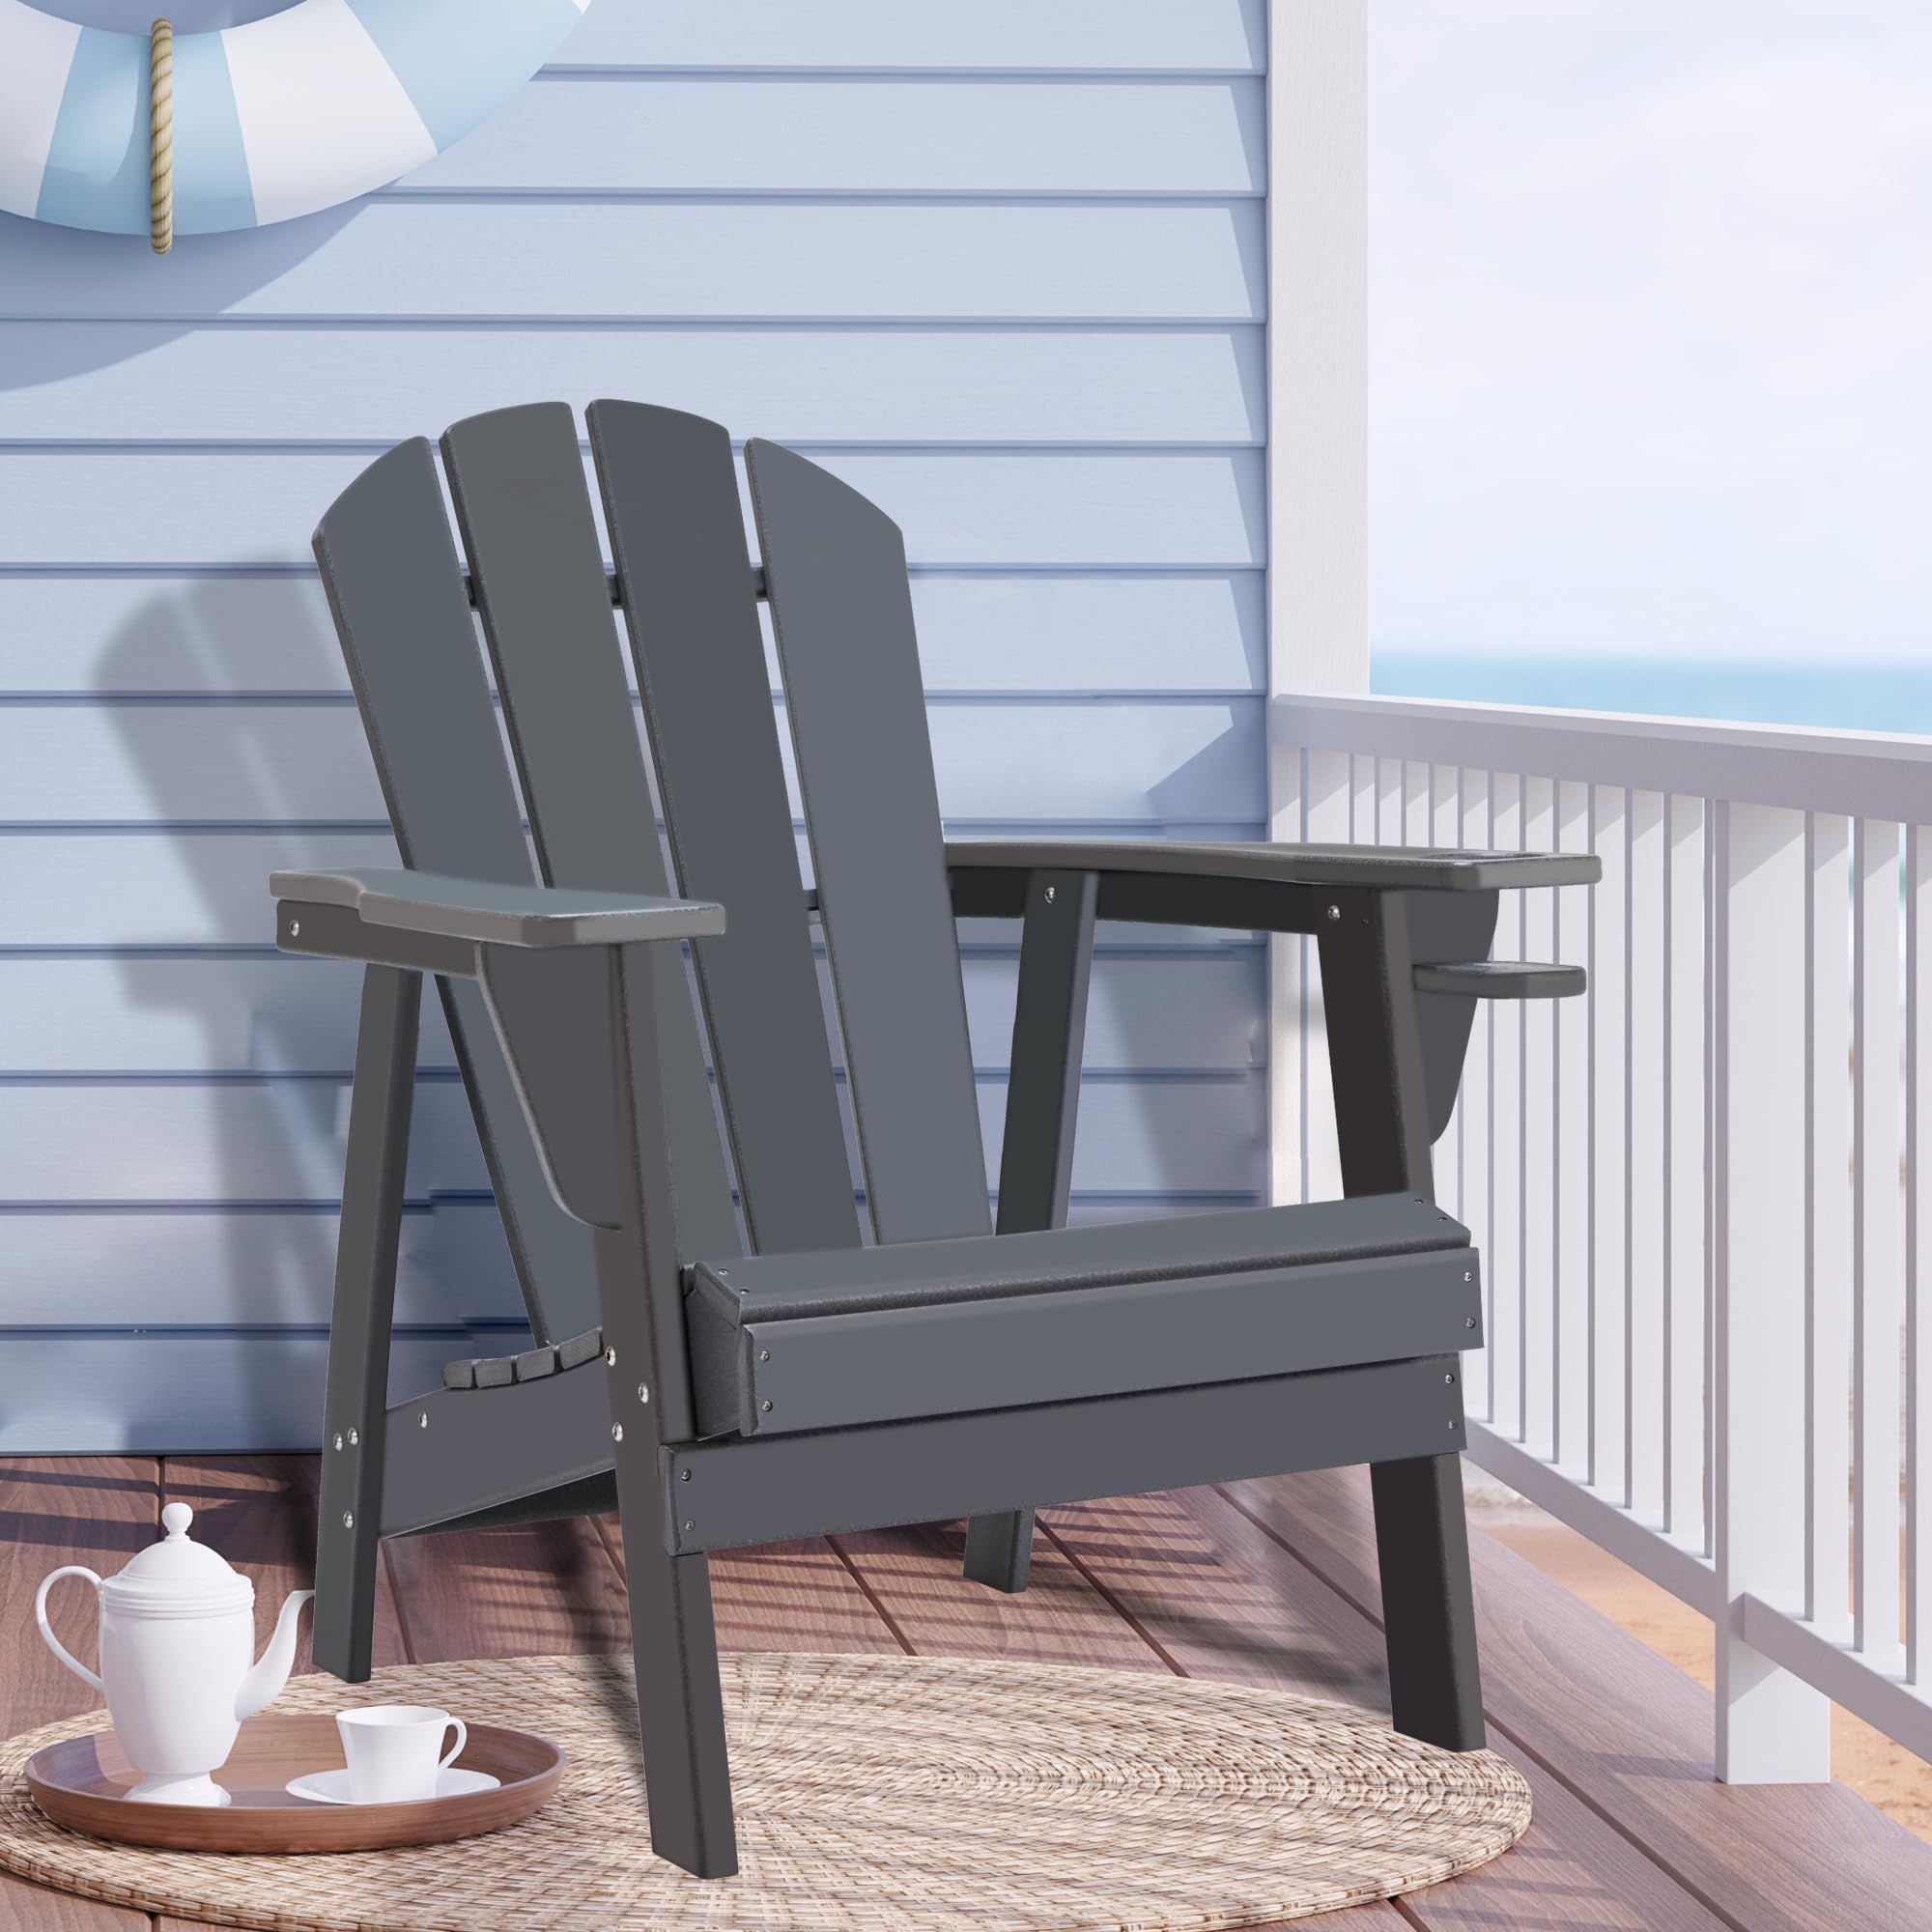 This Best-Selling Adirondack Chair Is 40% Off Online Right Now